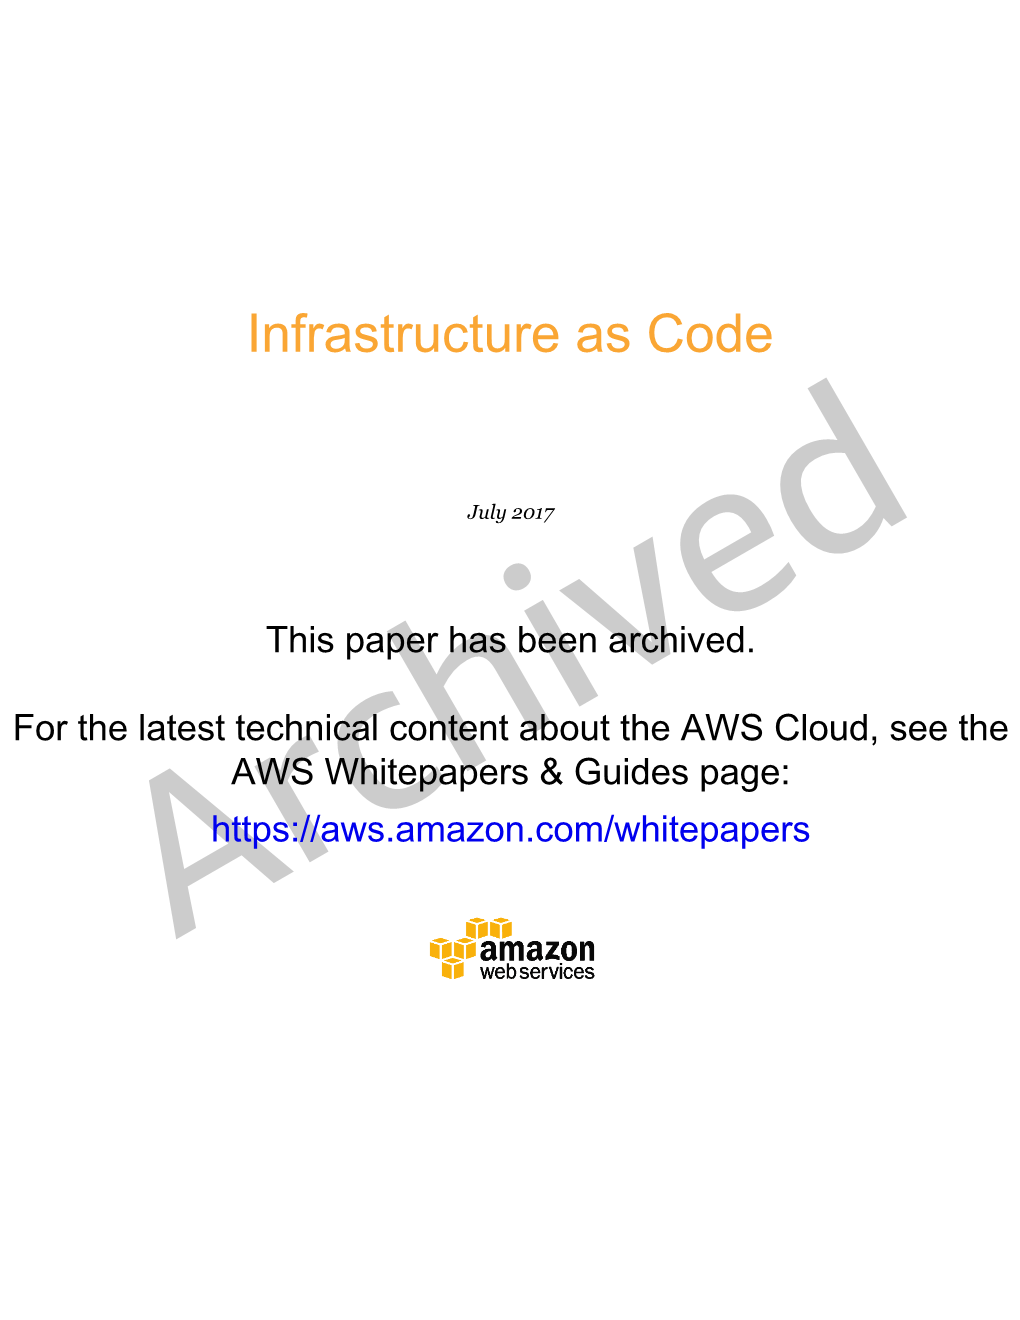 AWS Infrastructure As Code